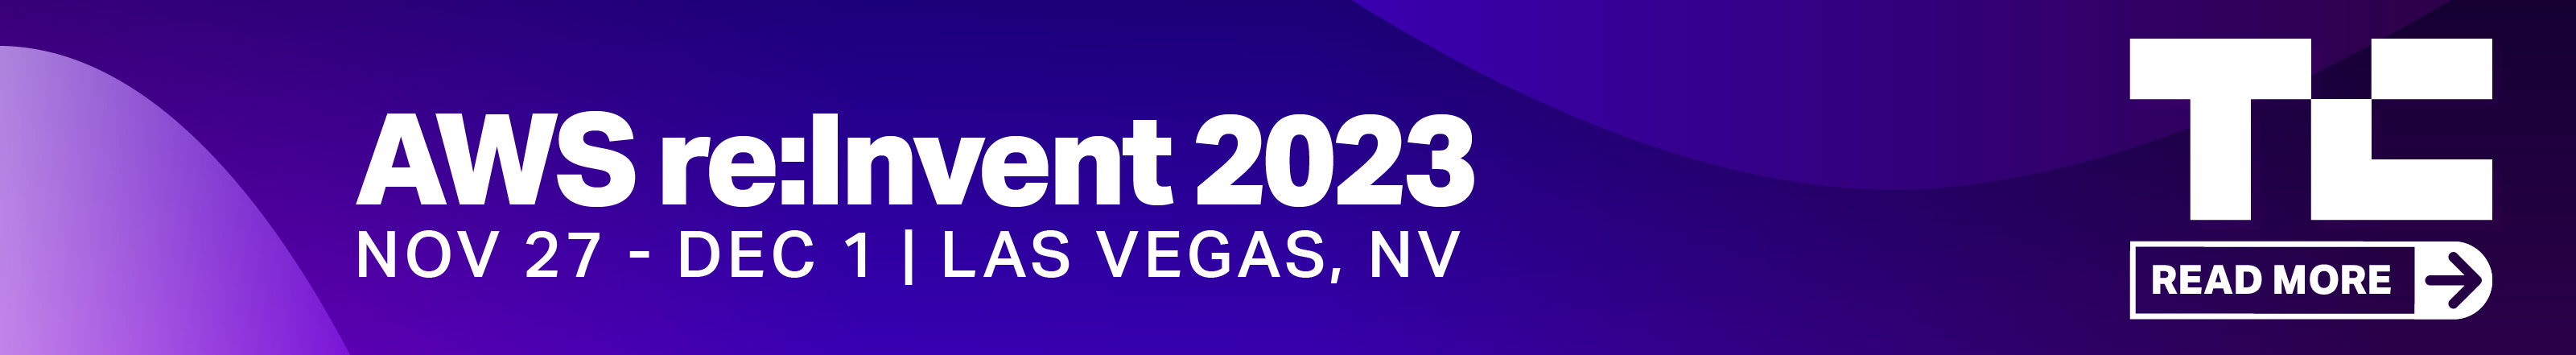 Read more about AWS re:Invent 2023 on TechCrunch